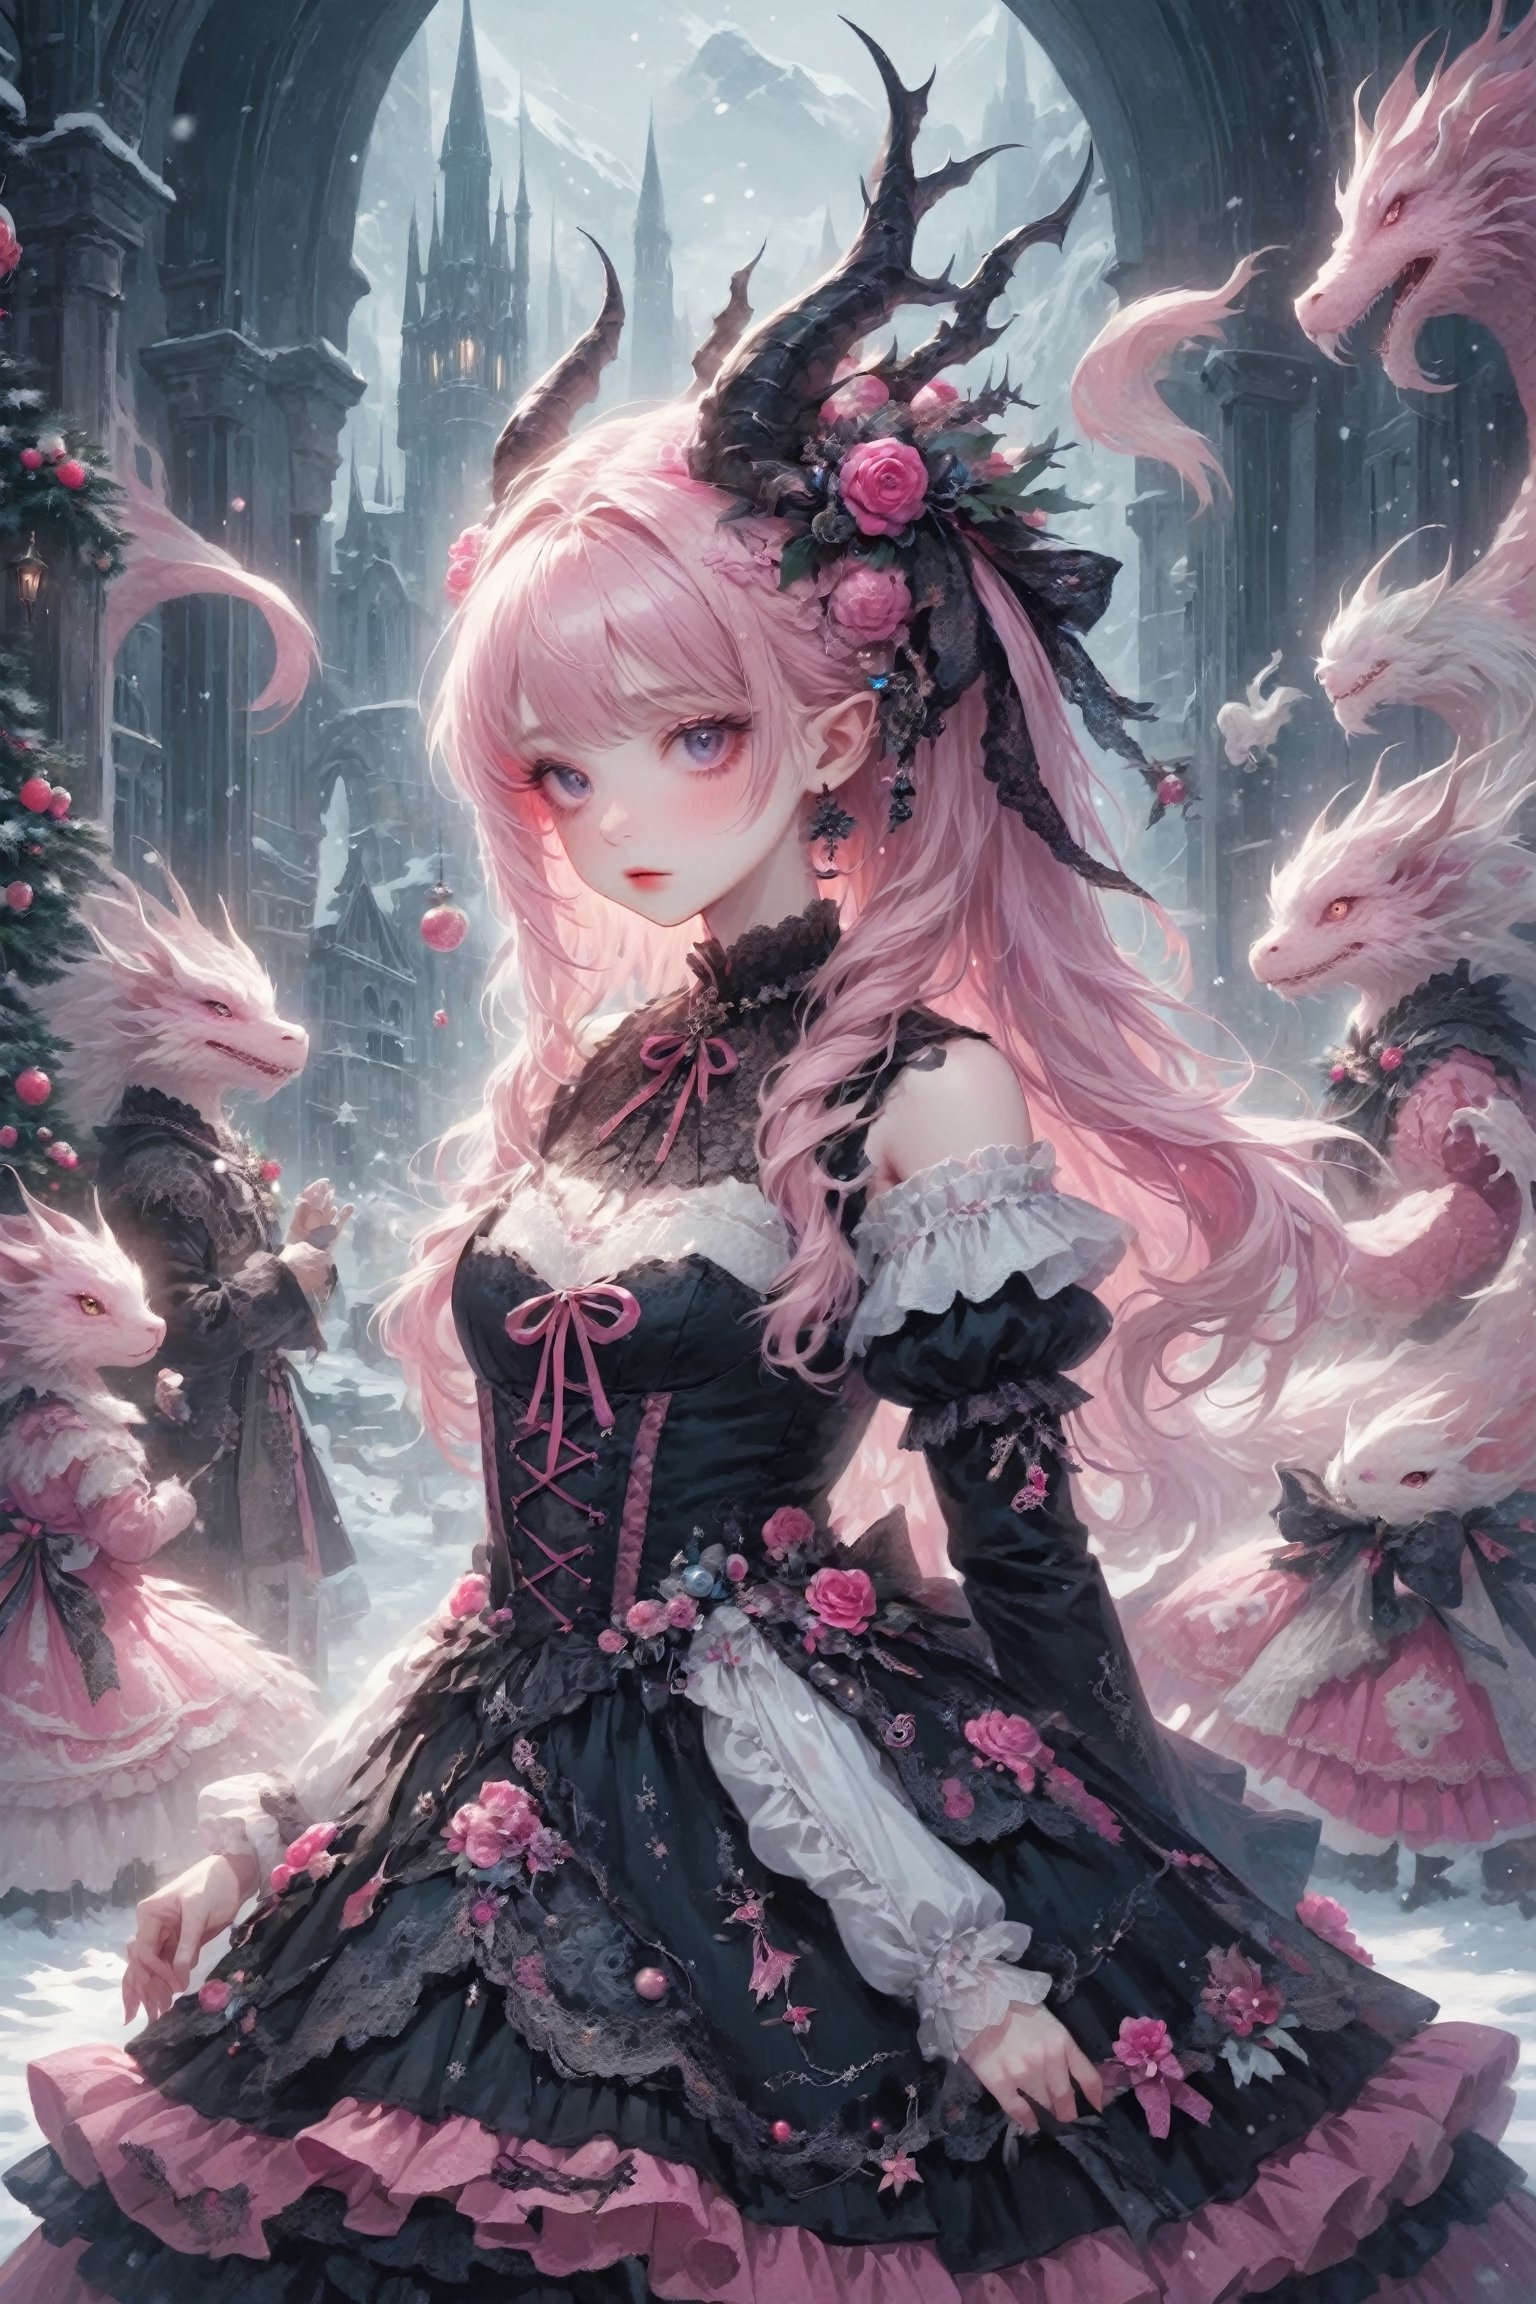 A Gothic Lolita girl, with dragon eyes and dragon horns,Depth and Dimension in the Pupils,
gracefully crystalline cheeks, her attire adorned with intricate pink lace and dark, ethereal fabrics,(intricate dragon horns) elegantly complement her elaborate hairstyle, creating a mystical and captivating presence. Her eyes, reminiscent of a dragon's gaze, exude an otherworldly charm, adding a touch of fantasy to the Gothic Lolita aesthetic. The fusion of traditional Lolita elements with dragon-inspired details results in a unique and enchanting character.,dragon-themed,goth person,lolita_fashion,Dragon,gemsdragon,dragon_h,Chinese Dragon,Christmas Fantasy World